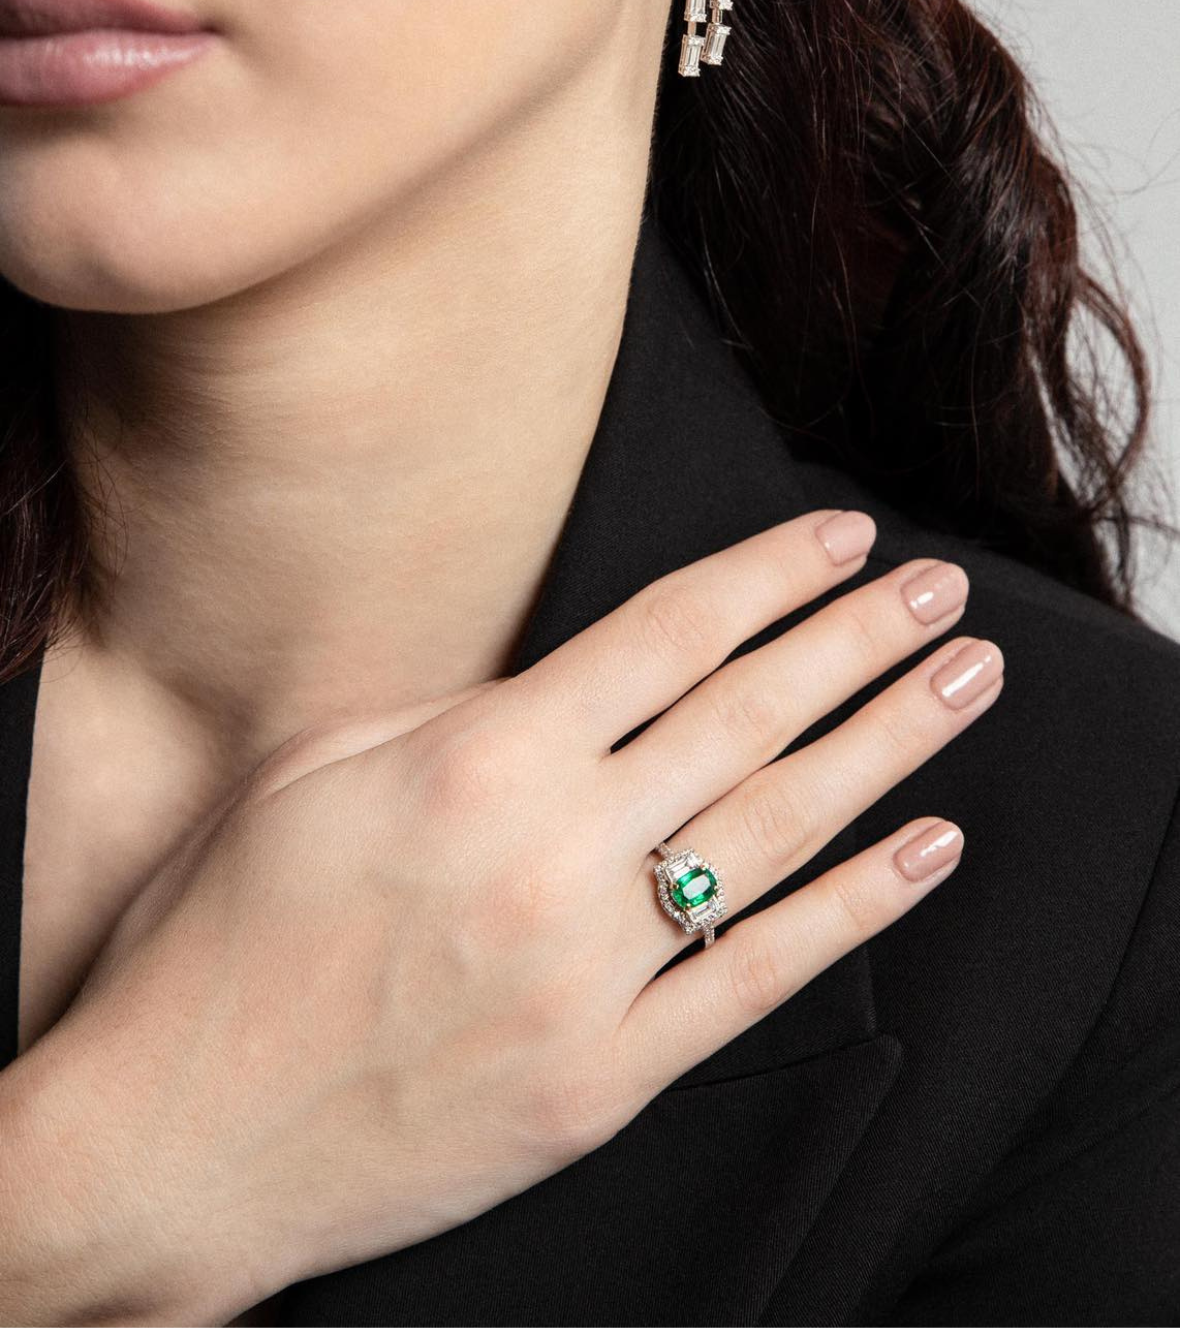 White Gold Ring with Baguette Diamonds and Emerald 03362 by Mentis Collection 